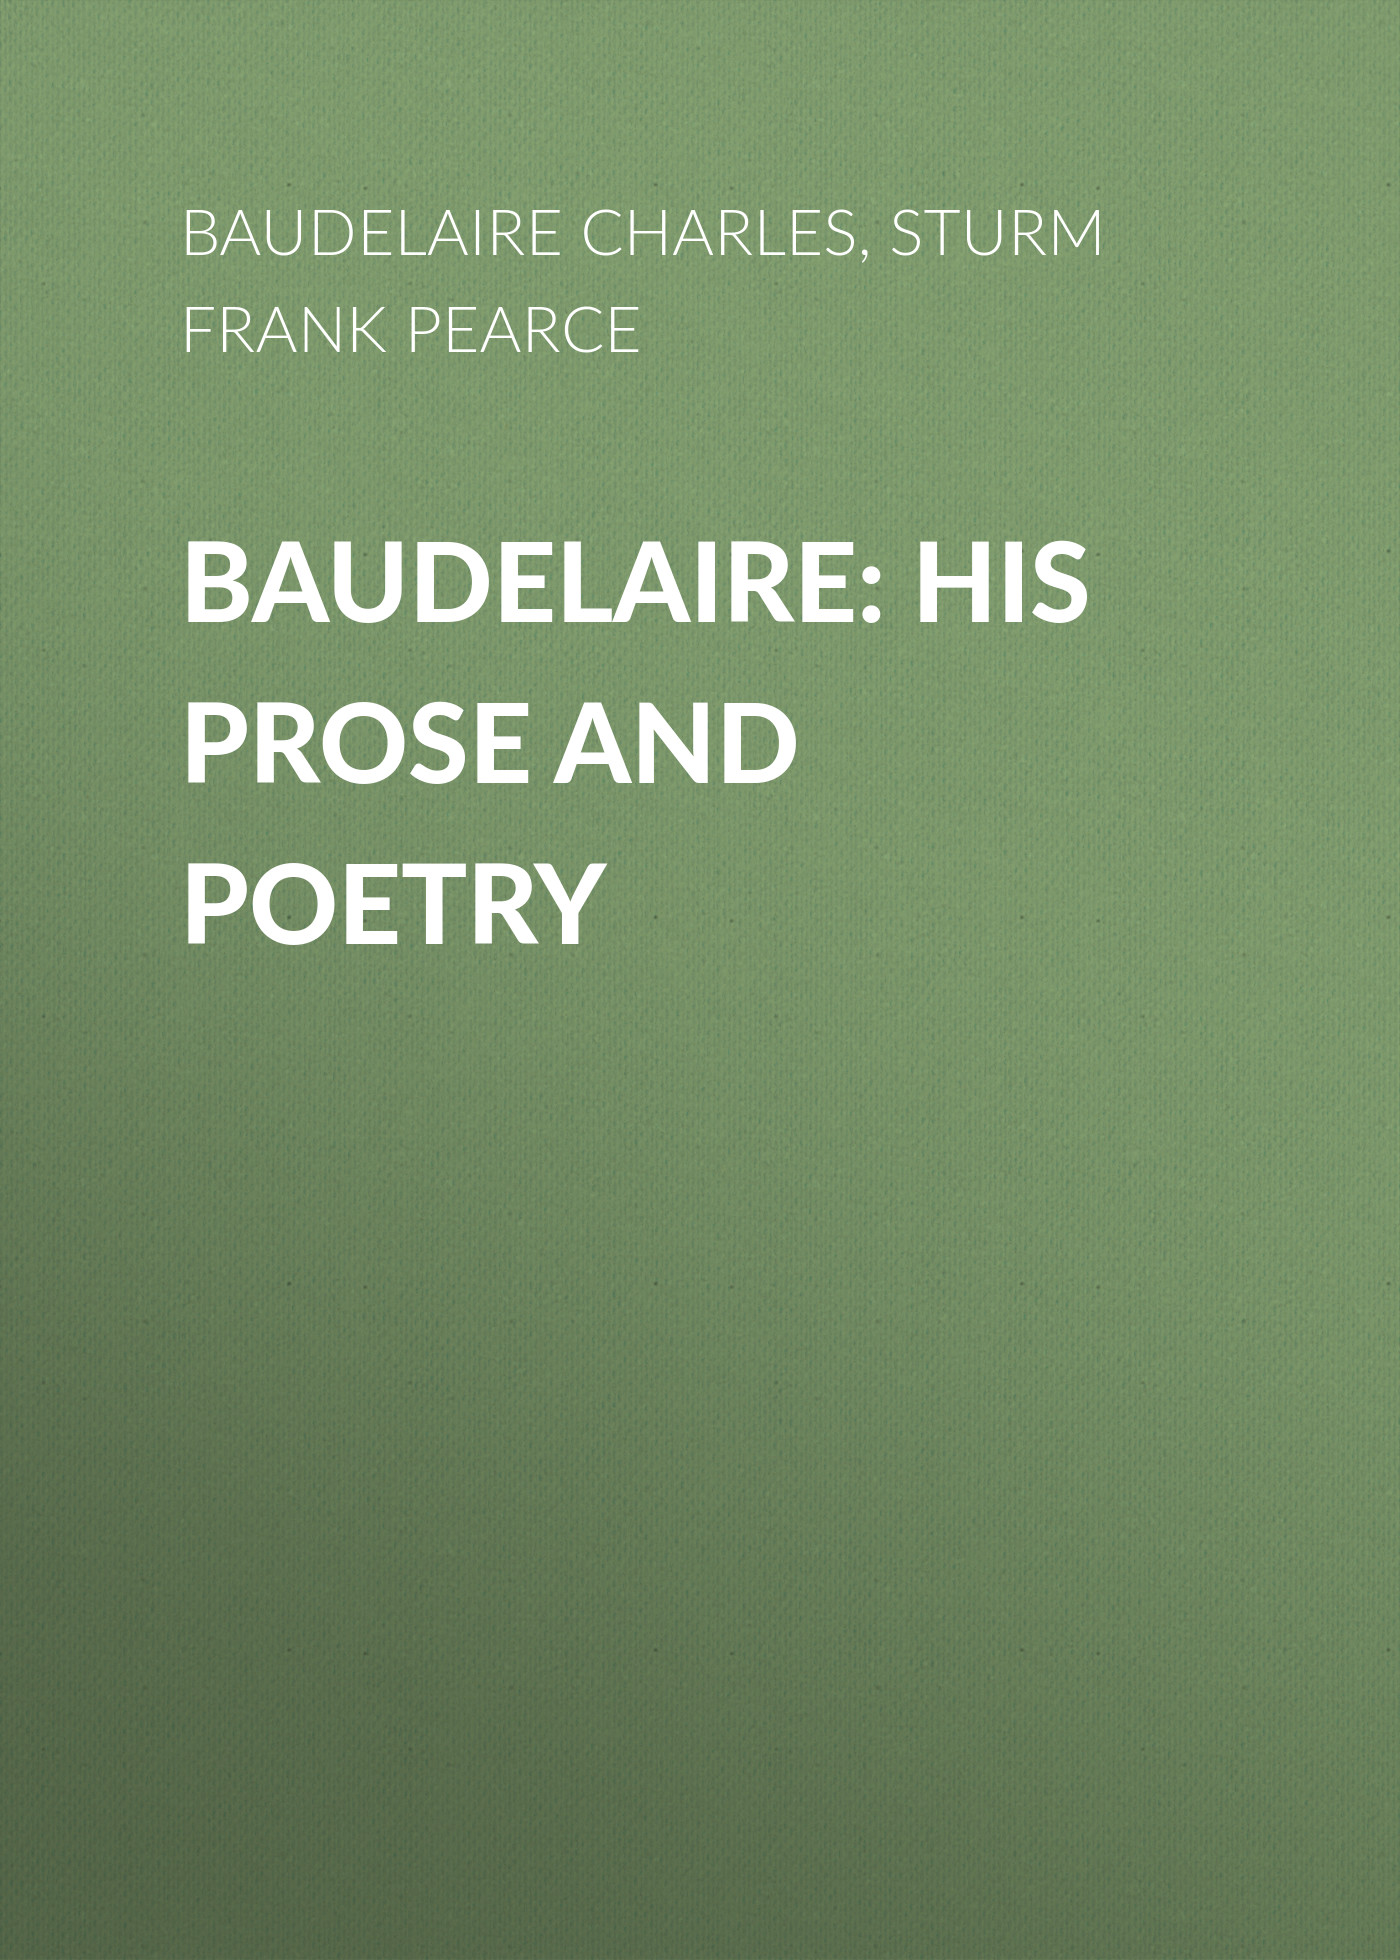 Baudelaire: His Prose and Poetry